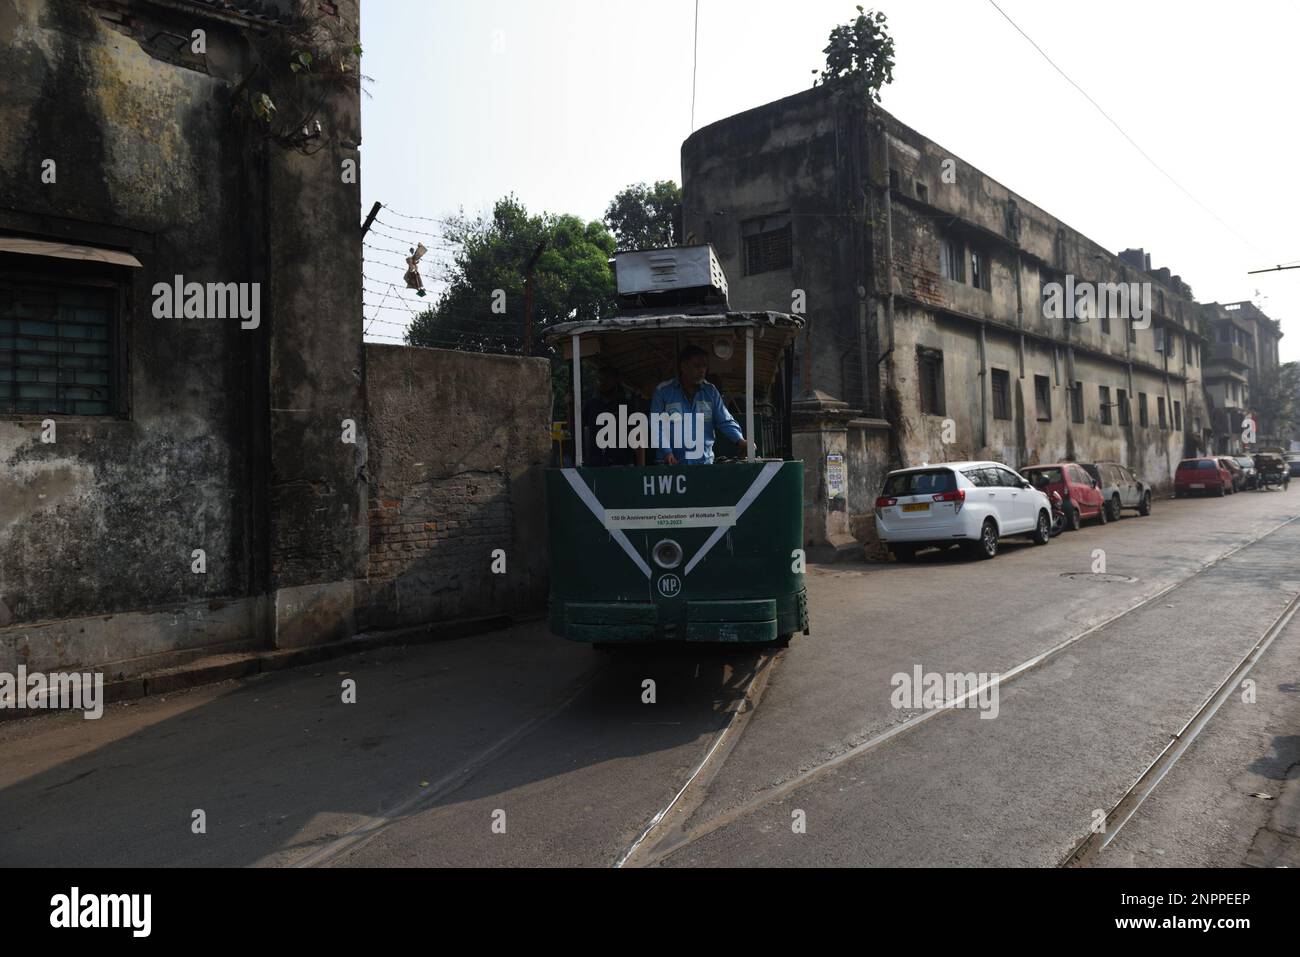 Non Exclusive: Kolkata, India - 26 February, 2023: Kolkata's iconic tramways turns 150 and to celebrate the momentous occasion a tram parade with some Stock Photo